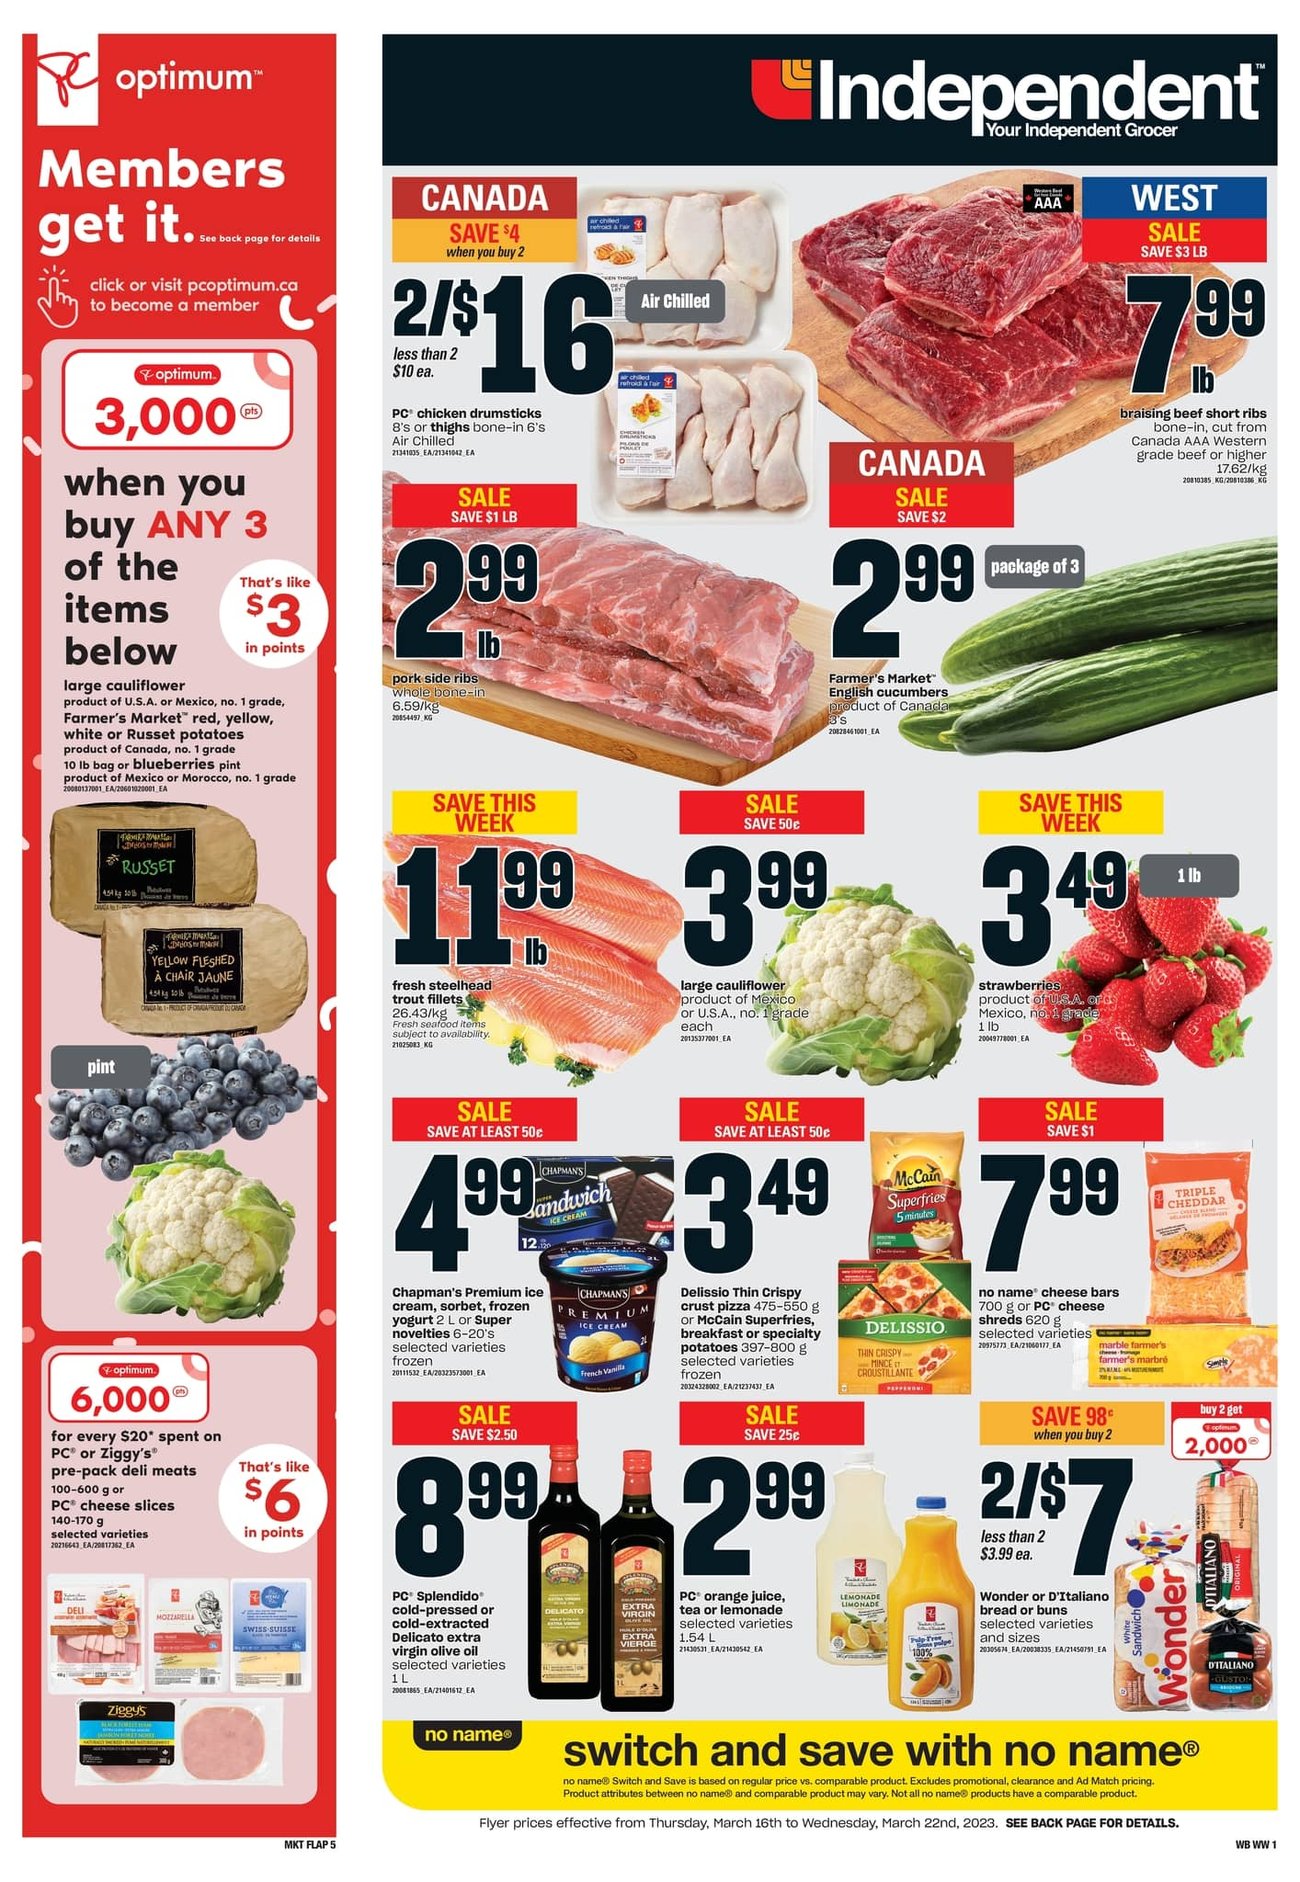 Independent - Western Canada - Weekly Flyer Specials - Page 1